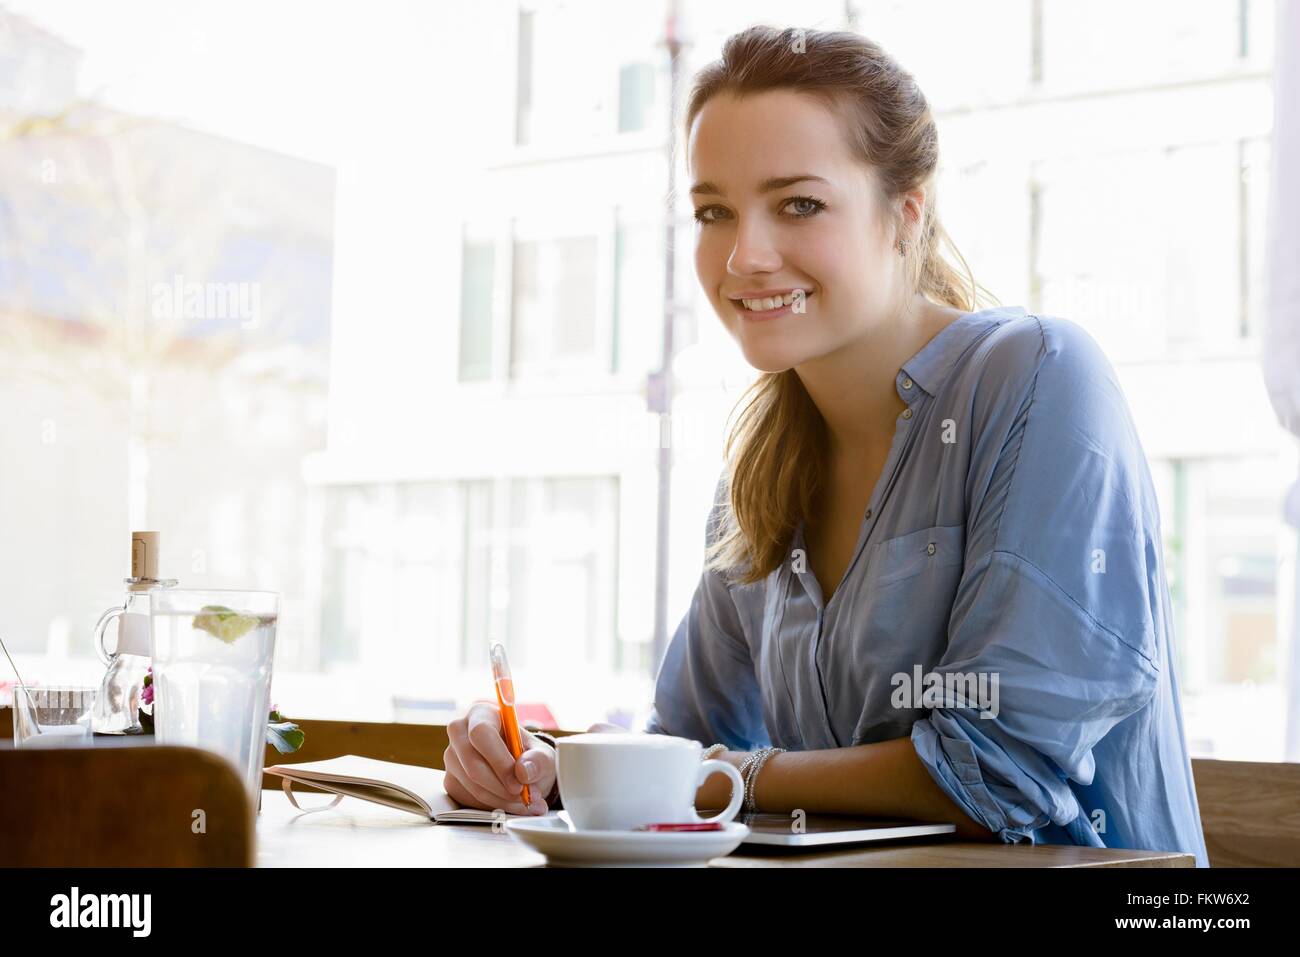 Young woman in cafe writing, looking at camera smiling Stock Photo